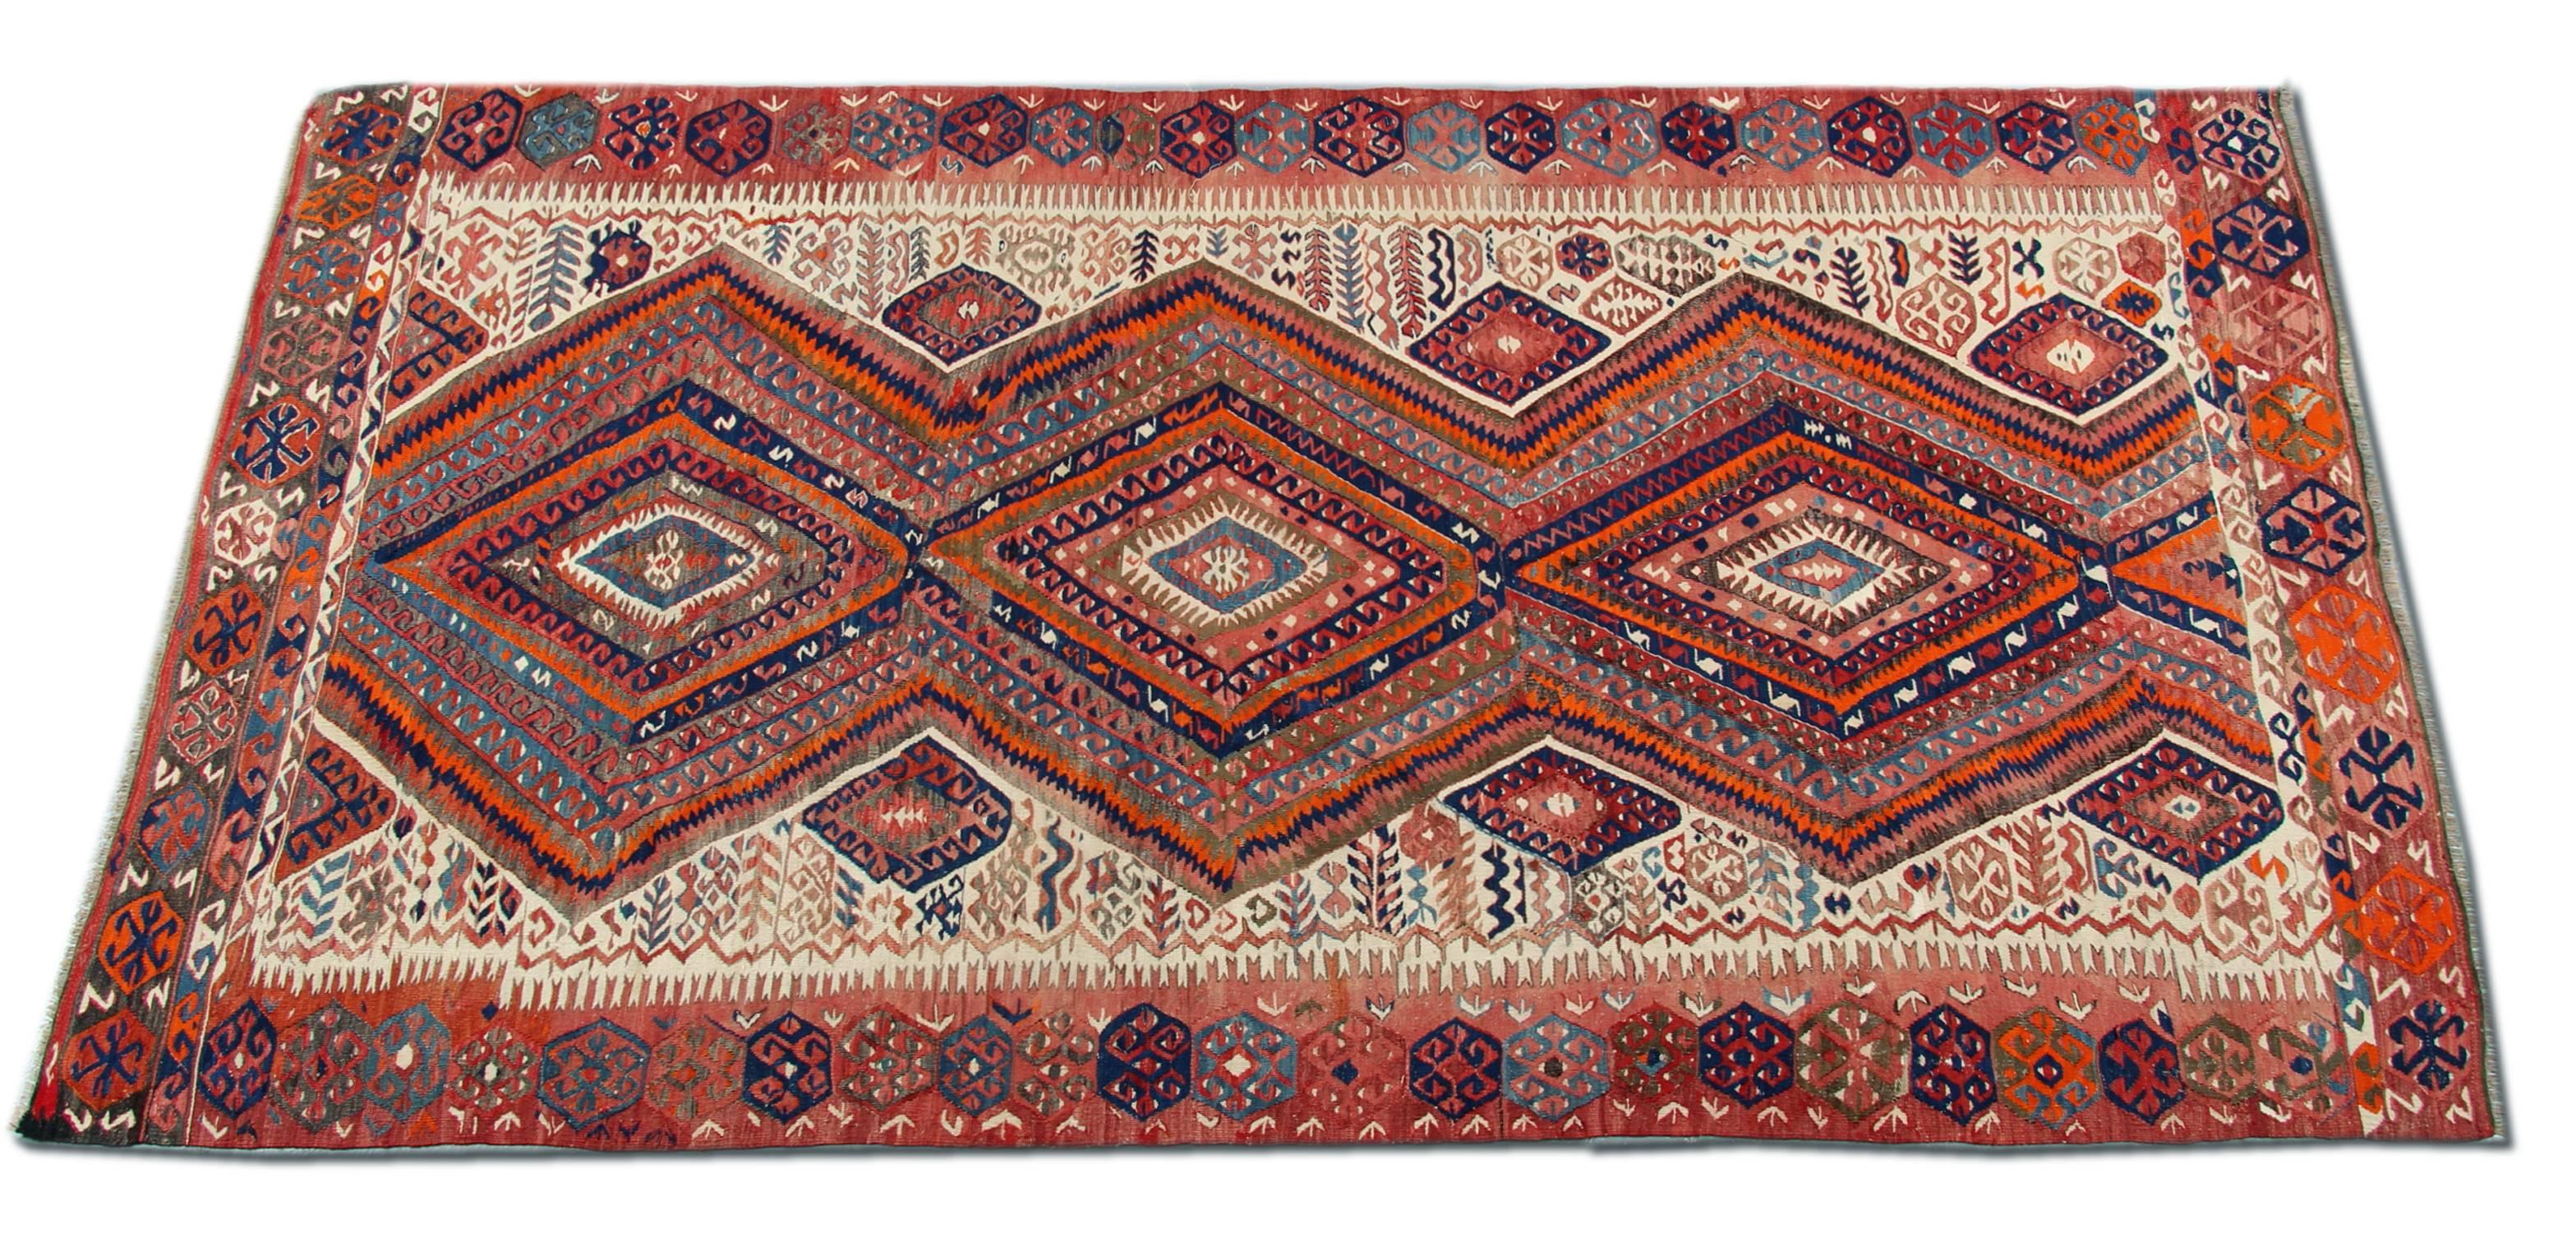 This antique Kilim Oriental rug is a Turkish handmade carpet rug has woven by very skilled weavers in Turkey, Anatolia, who used the highest quality wool and cotton. The flat-weave rug has light red, orange, grey-green, white, gold, yellow and dark